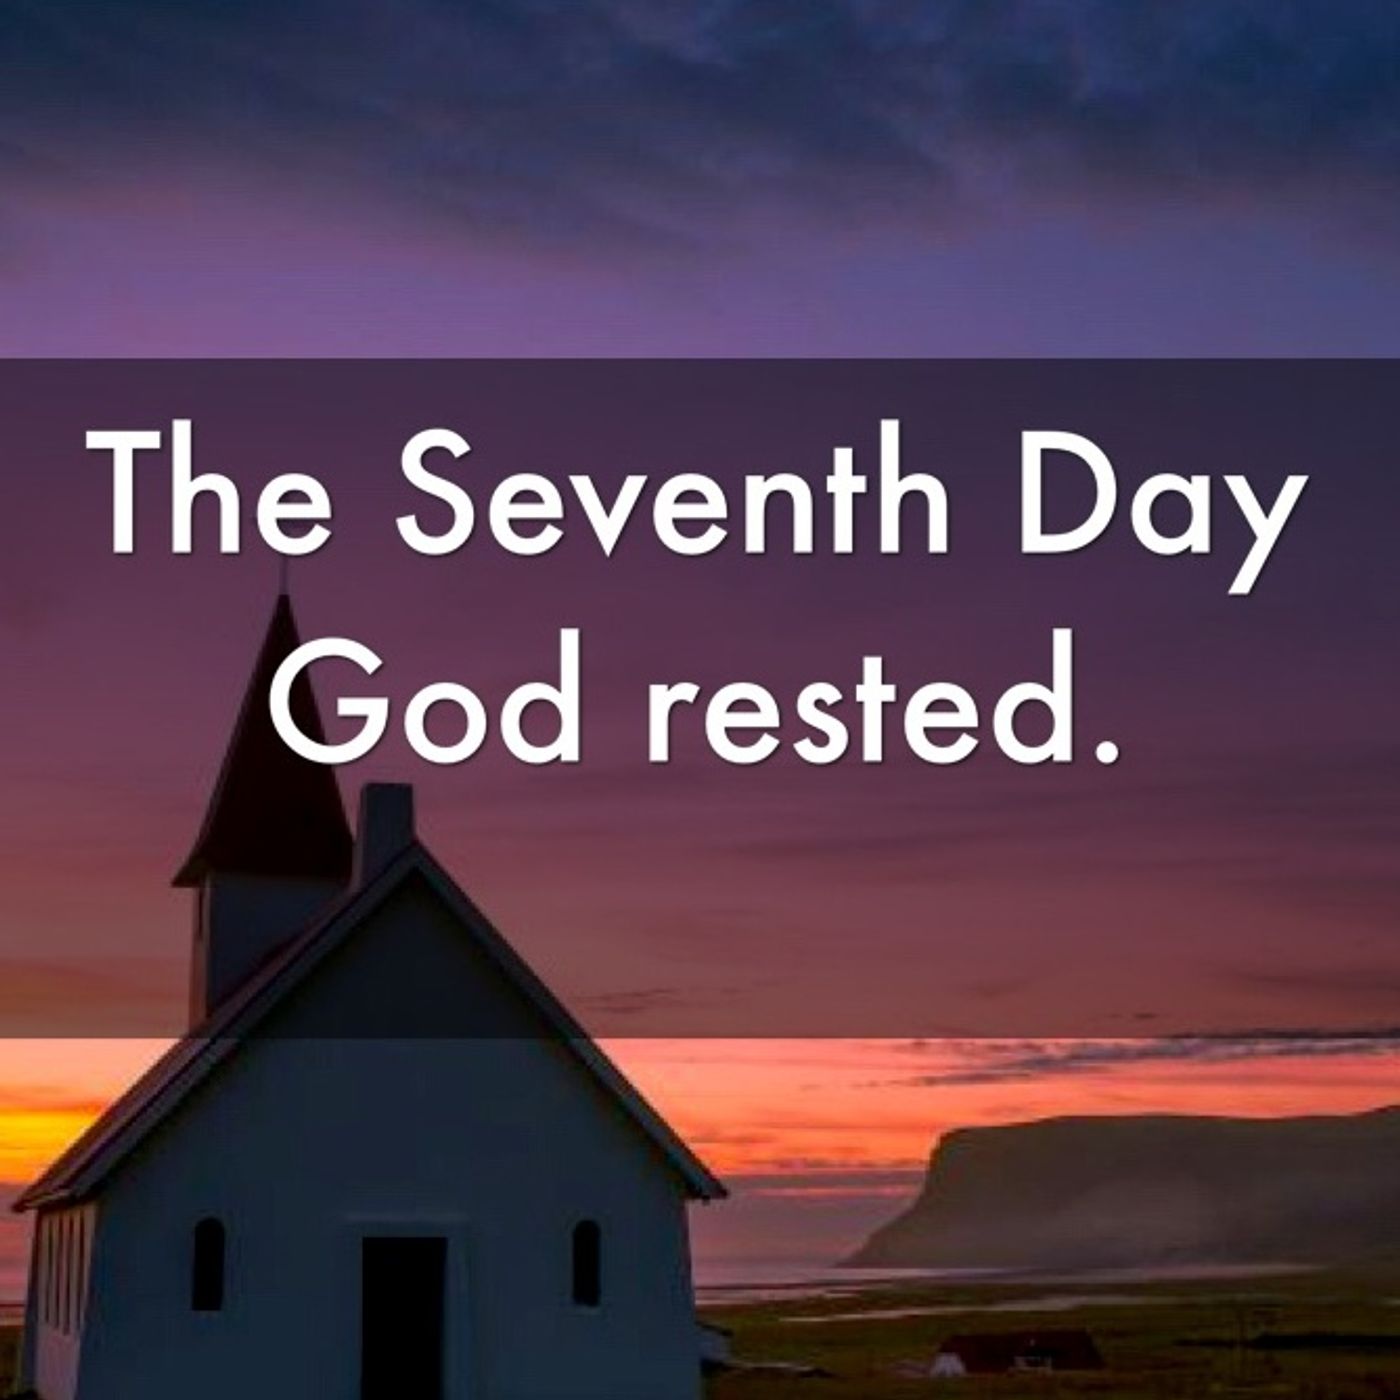 What did God do on the seventh day of creation?